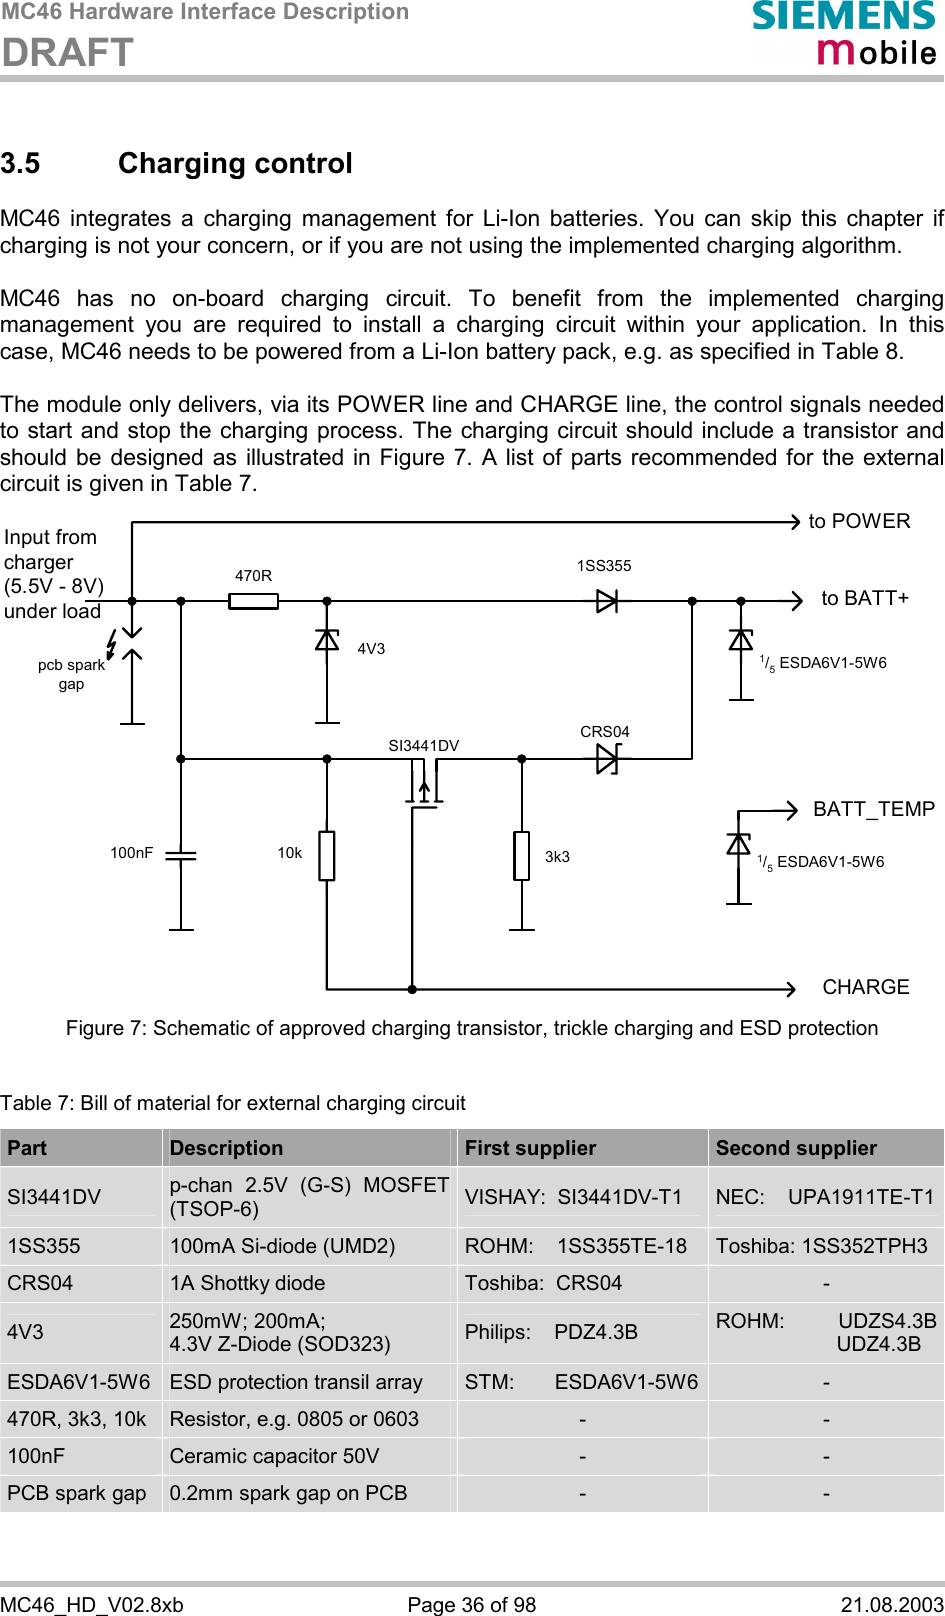 MC46 Hardware Interface Description DRAFT      MC46_HD_V02.8xb  Page 36 of 98  21.08.2003 3.5 Charging control MC46 integrates a charging management for Li-Ion batteries. You can skip this chapter if charging is not your concern, or if you are not using the implemented charging algorithm.  MC46 has no on-board charging circuit. To benefit from the implemented charging management you are required to install a charging circuit within your application. In this case, MC46 needs to be powered from a Li-Ion battery pack, e.g. as specified in Table 8.  The module only delivers, via its POWER line and CHARGE line, the control signals needed to start and stop the charging process. The charging circuit should include a transistor and should be designed as illustrated in Figure 7. A list of parts recommended for the external circuit is given in Table 7.  to BATT+Input fromcharger(5.5V - 8V)under loadCHARGE470R 1SS355CRS043k3100nF 10kSI3441DV4V3 1/5 ESDA6V1-5W6pcb sparkgapto POWERBATT_TEMP1/5 ESDA6V1-5W6 Figure 7: Schematic of approved charging transistor, trickle charging and ESD protection  Table 7: Bill of material for external charging circuit Part  Description  First supplier  Second supplier SI3441DV  p-chan 2.5V (G-S) MOSFET (TSOP-6)  VISHAY:  SI3441DV-T1  NEC:    UPA1911TE-T11SS355  100mA Si-diode (UMD2)  ROHM:    1SS355TE-18  Toshiba: 1SS352TPH3 CRS04  1A Shottky diode   Toshiba:  CRS04  - 4V3  250mW; 200mA; 4.3V Z-Diode (SOD323)  Philips:    PDZ4.3B  ROHM: UDZS4.3B                     UDZ4.3B ESDA6V1-5W6  ESD protection transil array  STM:       ESDA6V1-5W6  - 470R, 3k3, 10k  Resistor, e.g. 0805 or 0603  -  - 100nF  Ceramic capacitor 50V  -  - PCB spark gap  0.2mm spark gap on PCB  -  - 